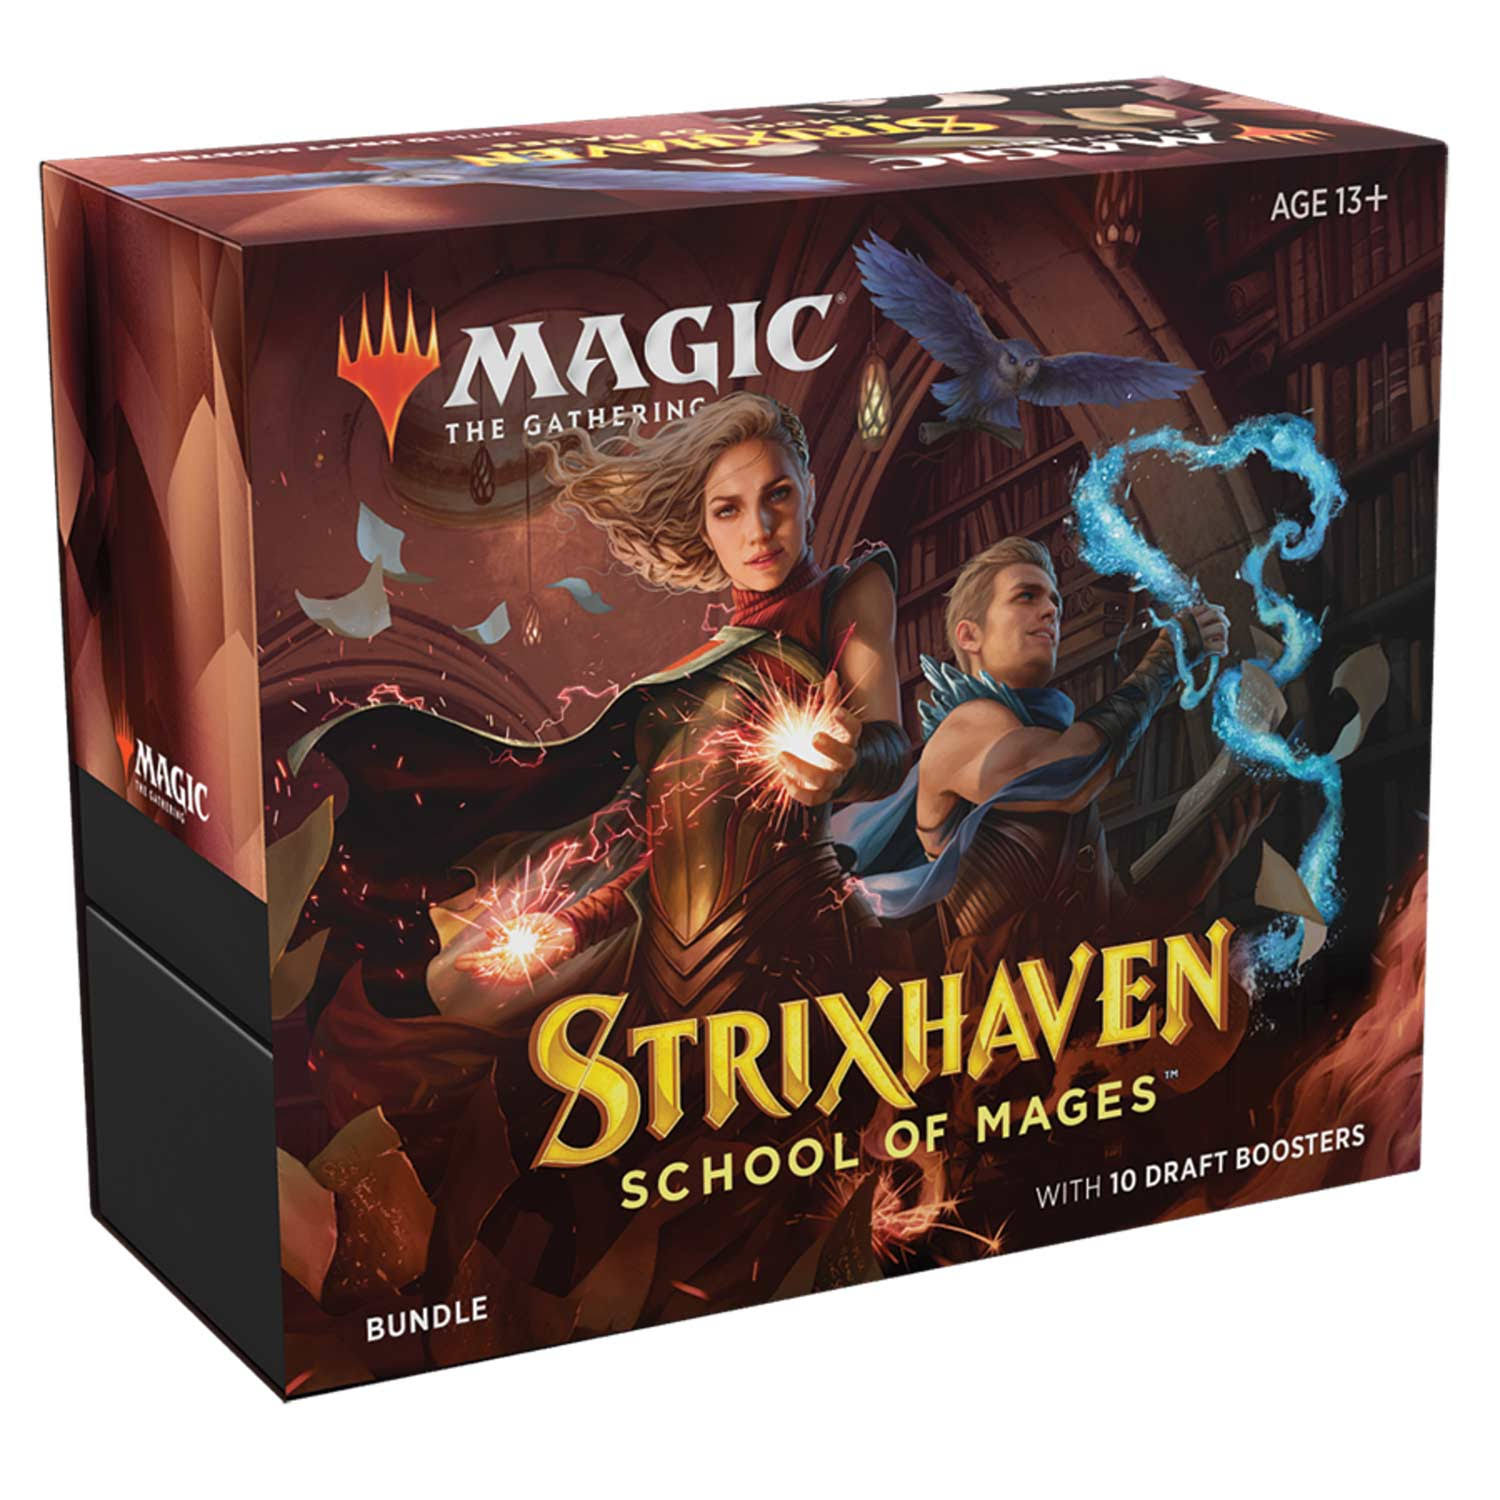 Magic The Gathering - Strixhaven School of Mages Bundle